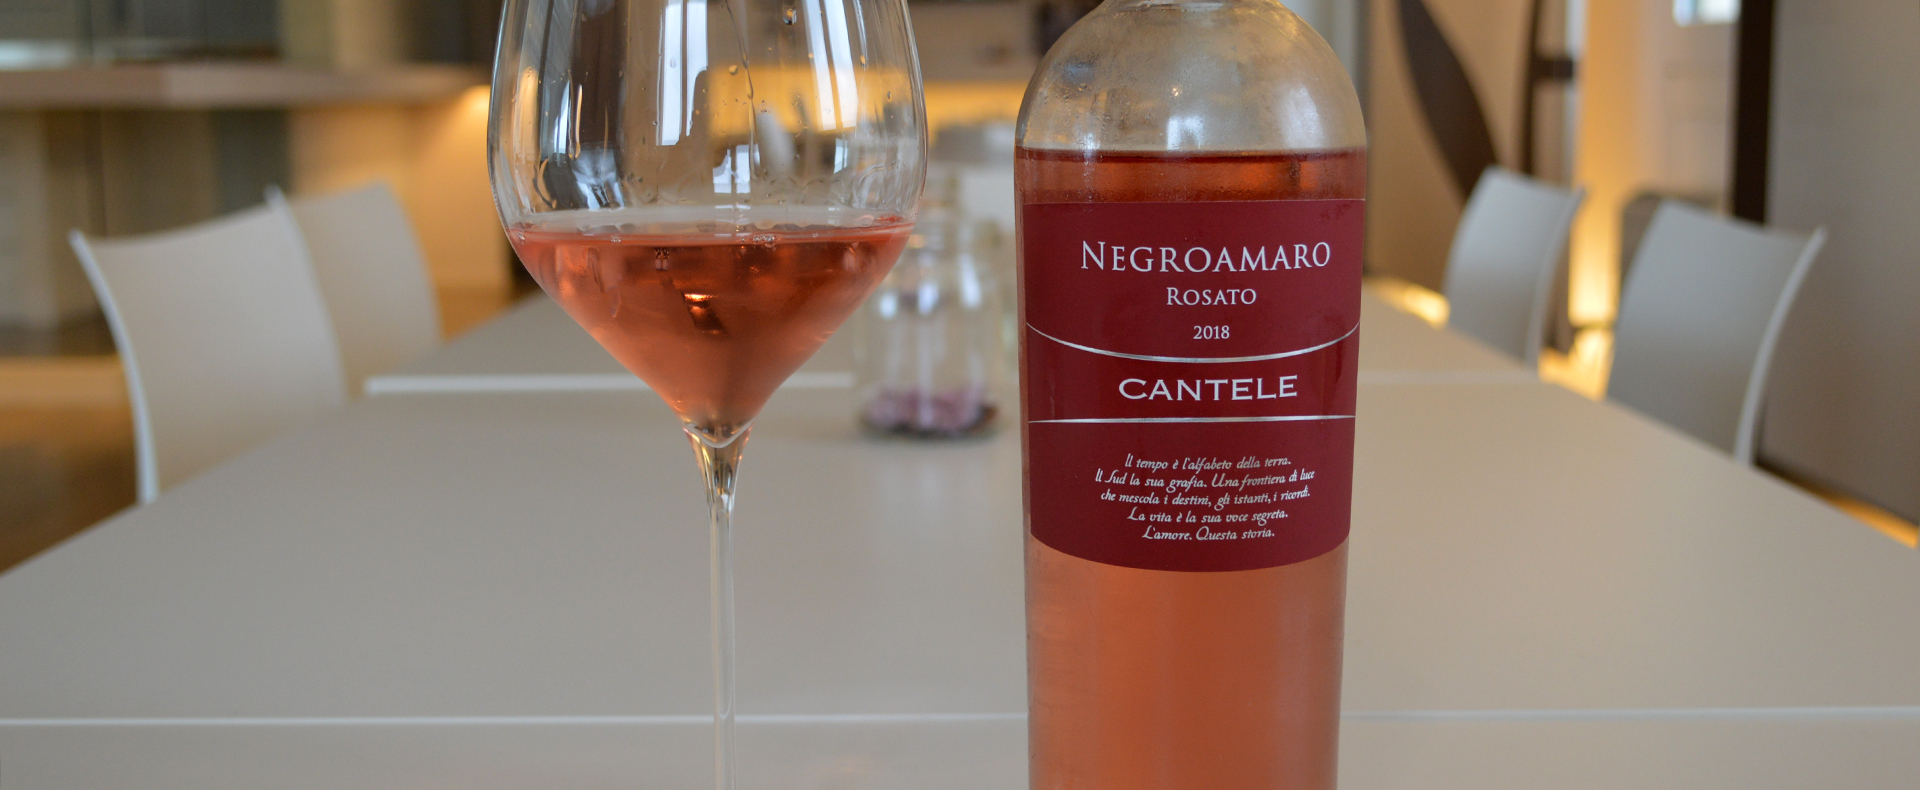 “When we eat pizza, arugula salad and meatballs in the summertime, this is the wine we crave!”